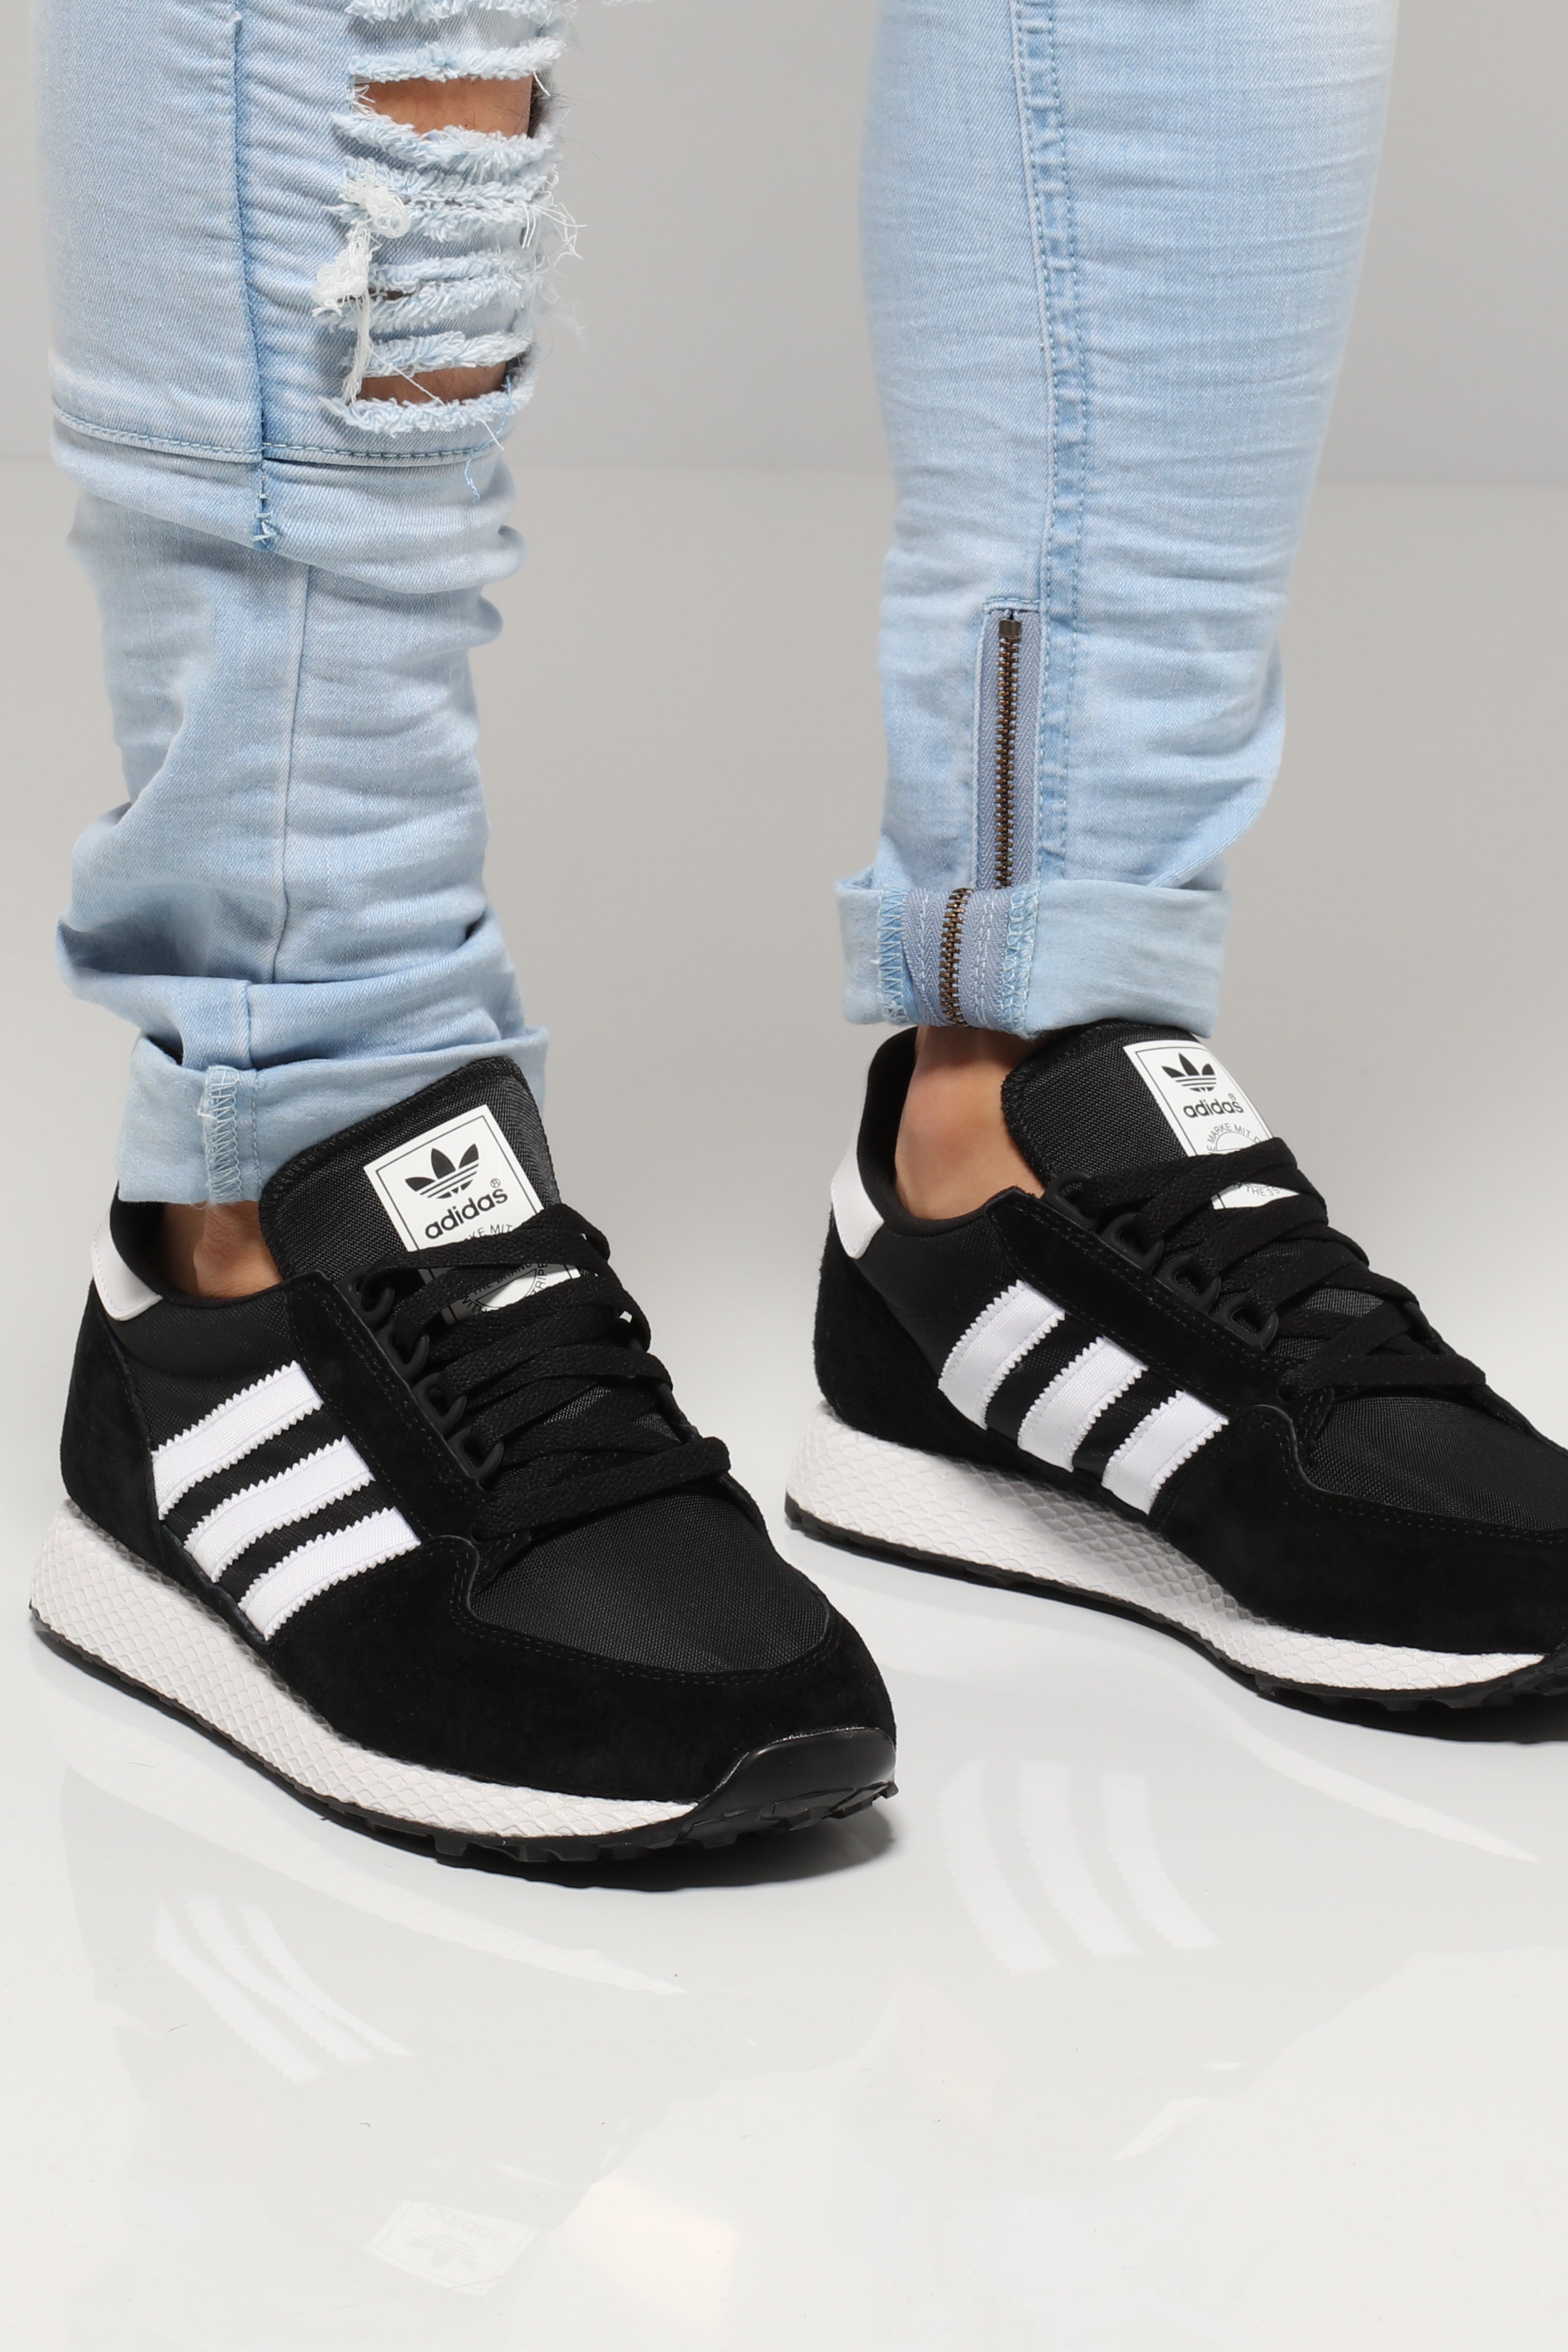 adidas forest grove black and white